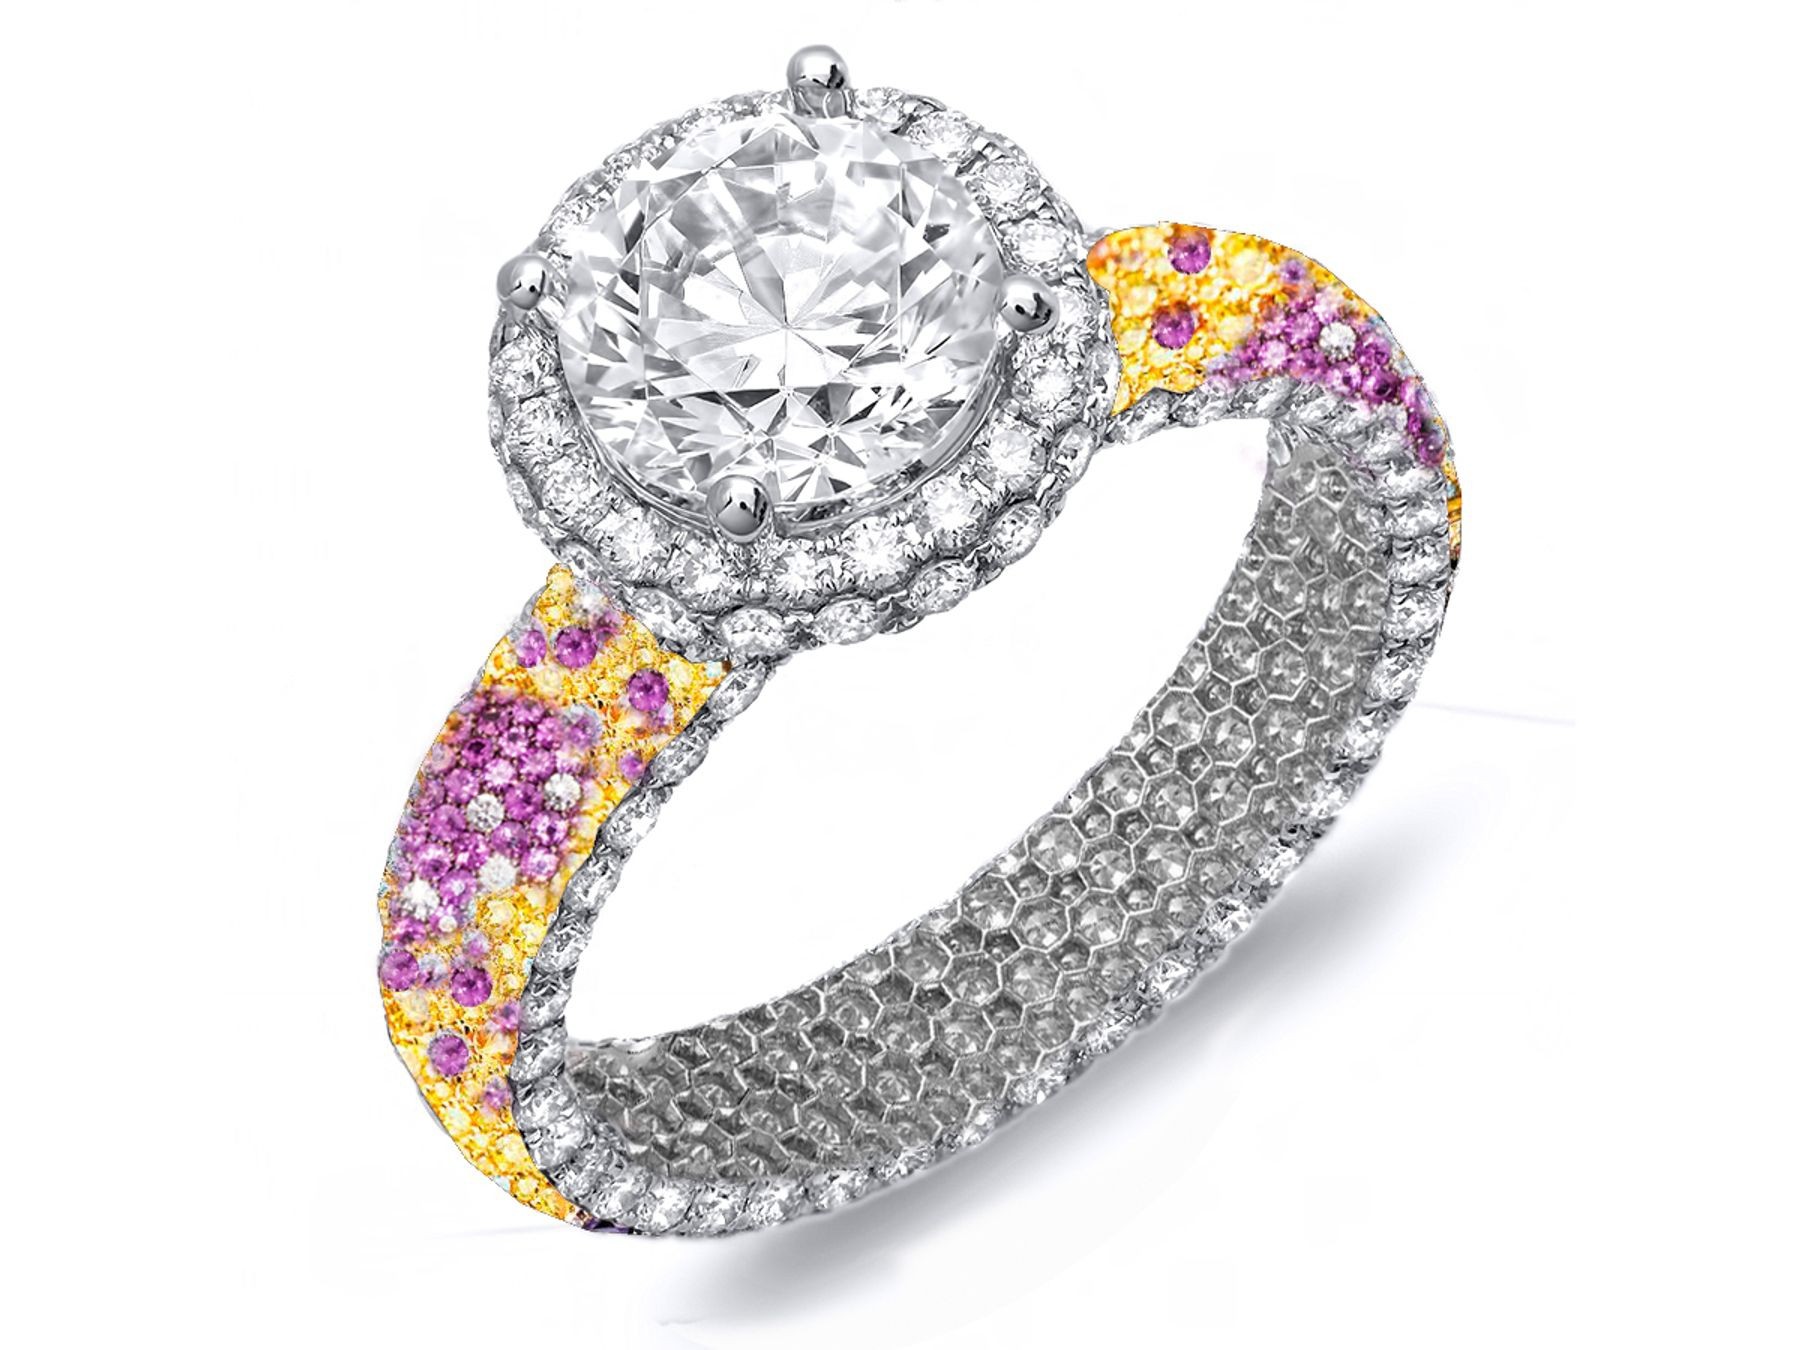 Browse Micro Pave Cluster Diamond & Multi-Colored Precious Stones Rubies, Emeralds & Blue, Pink, Purple, Yellow Sapphires